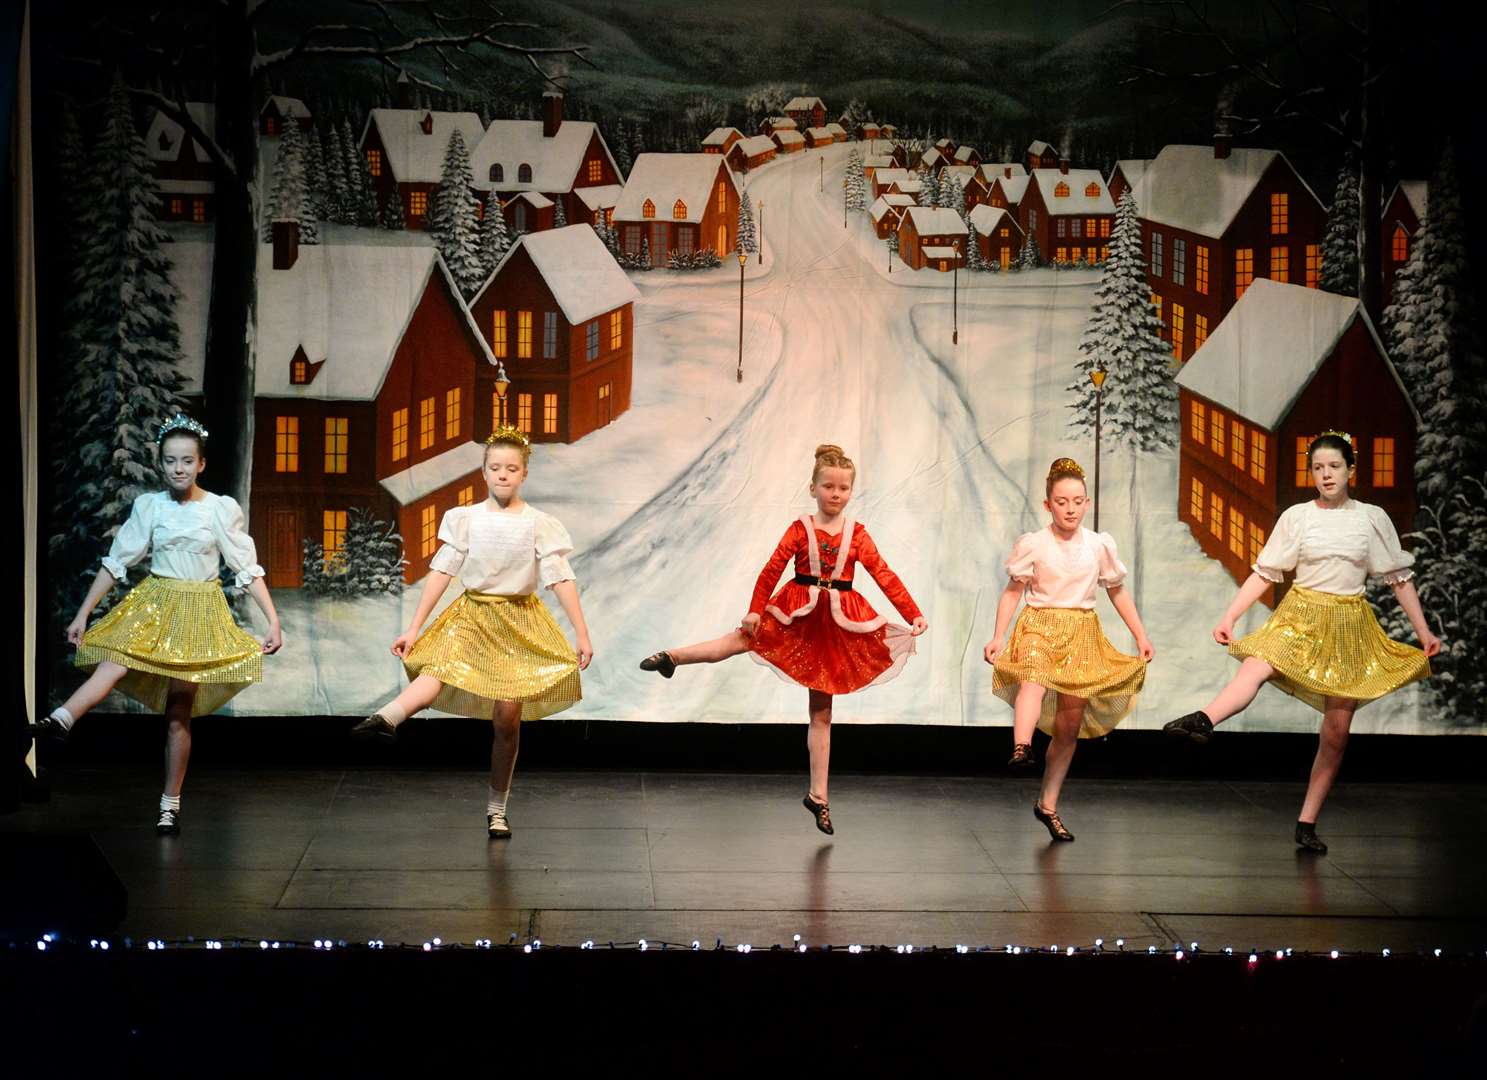 The dancers performed routines to Christmas songs.